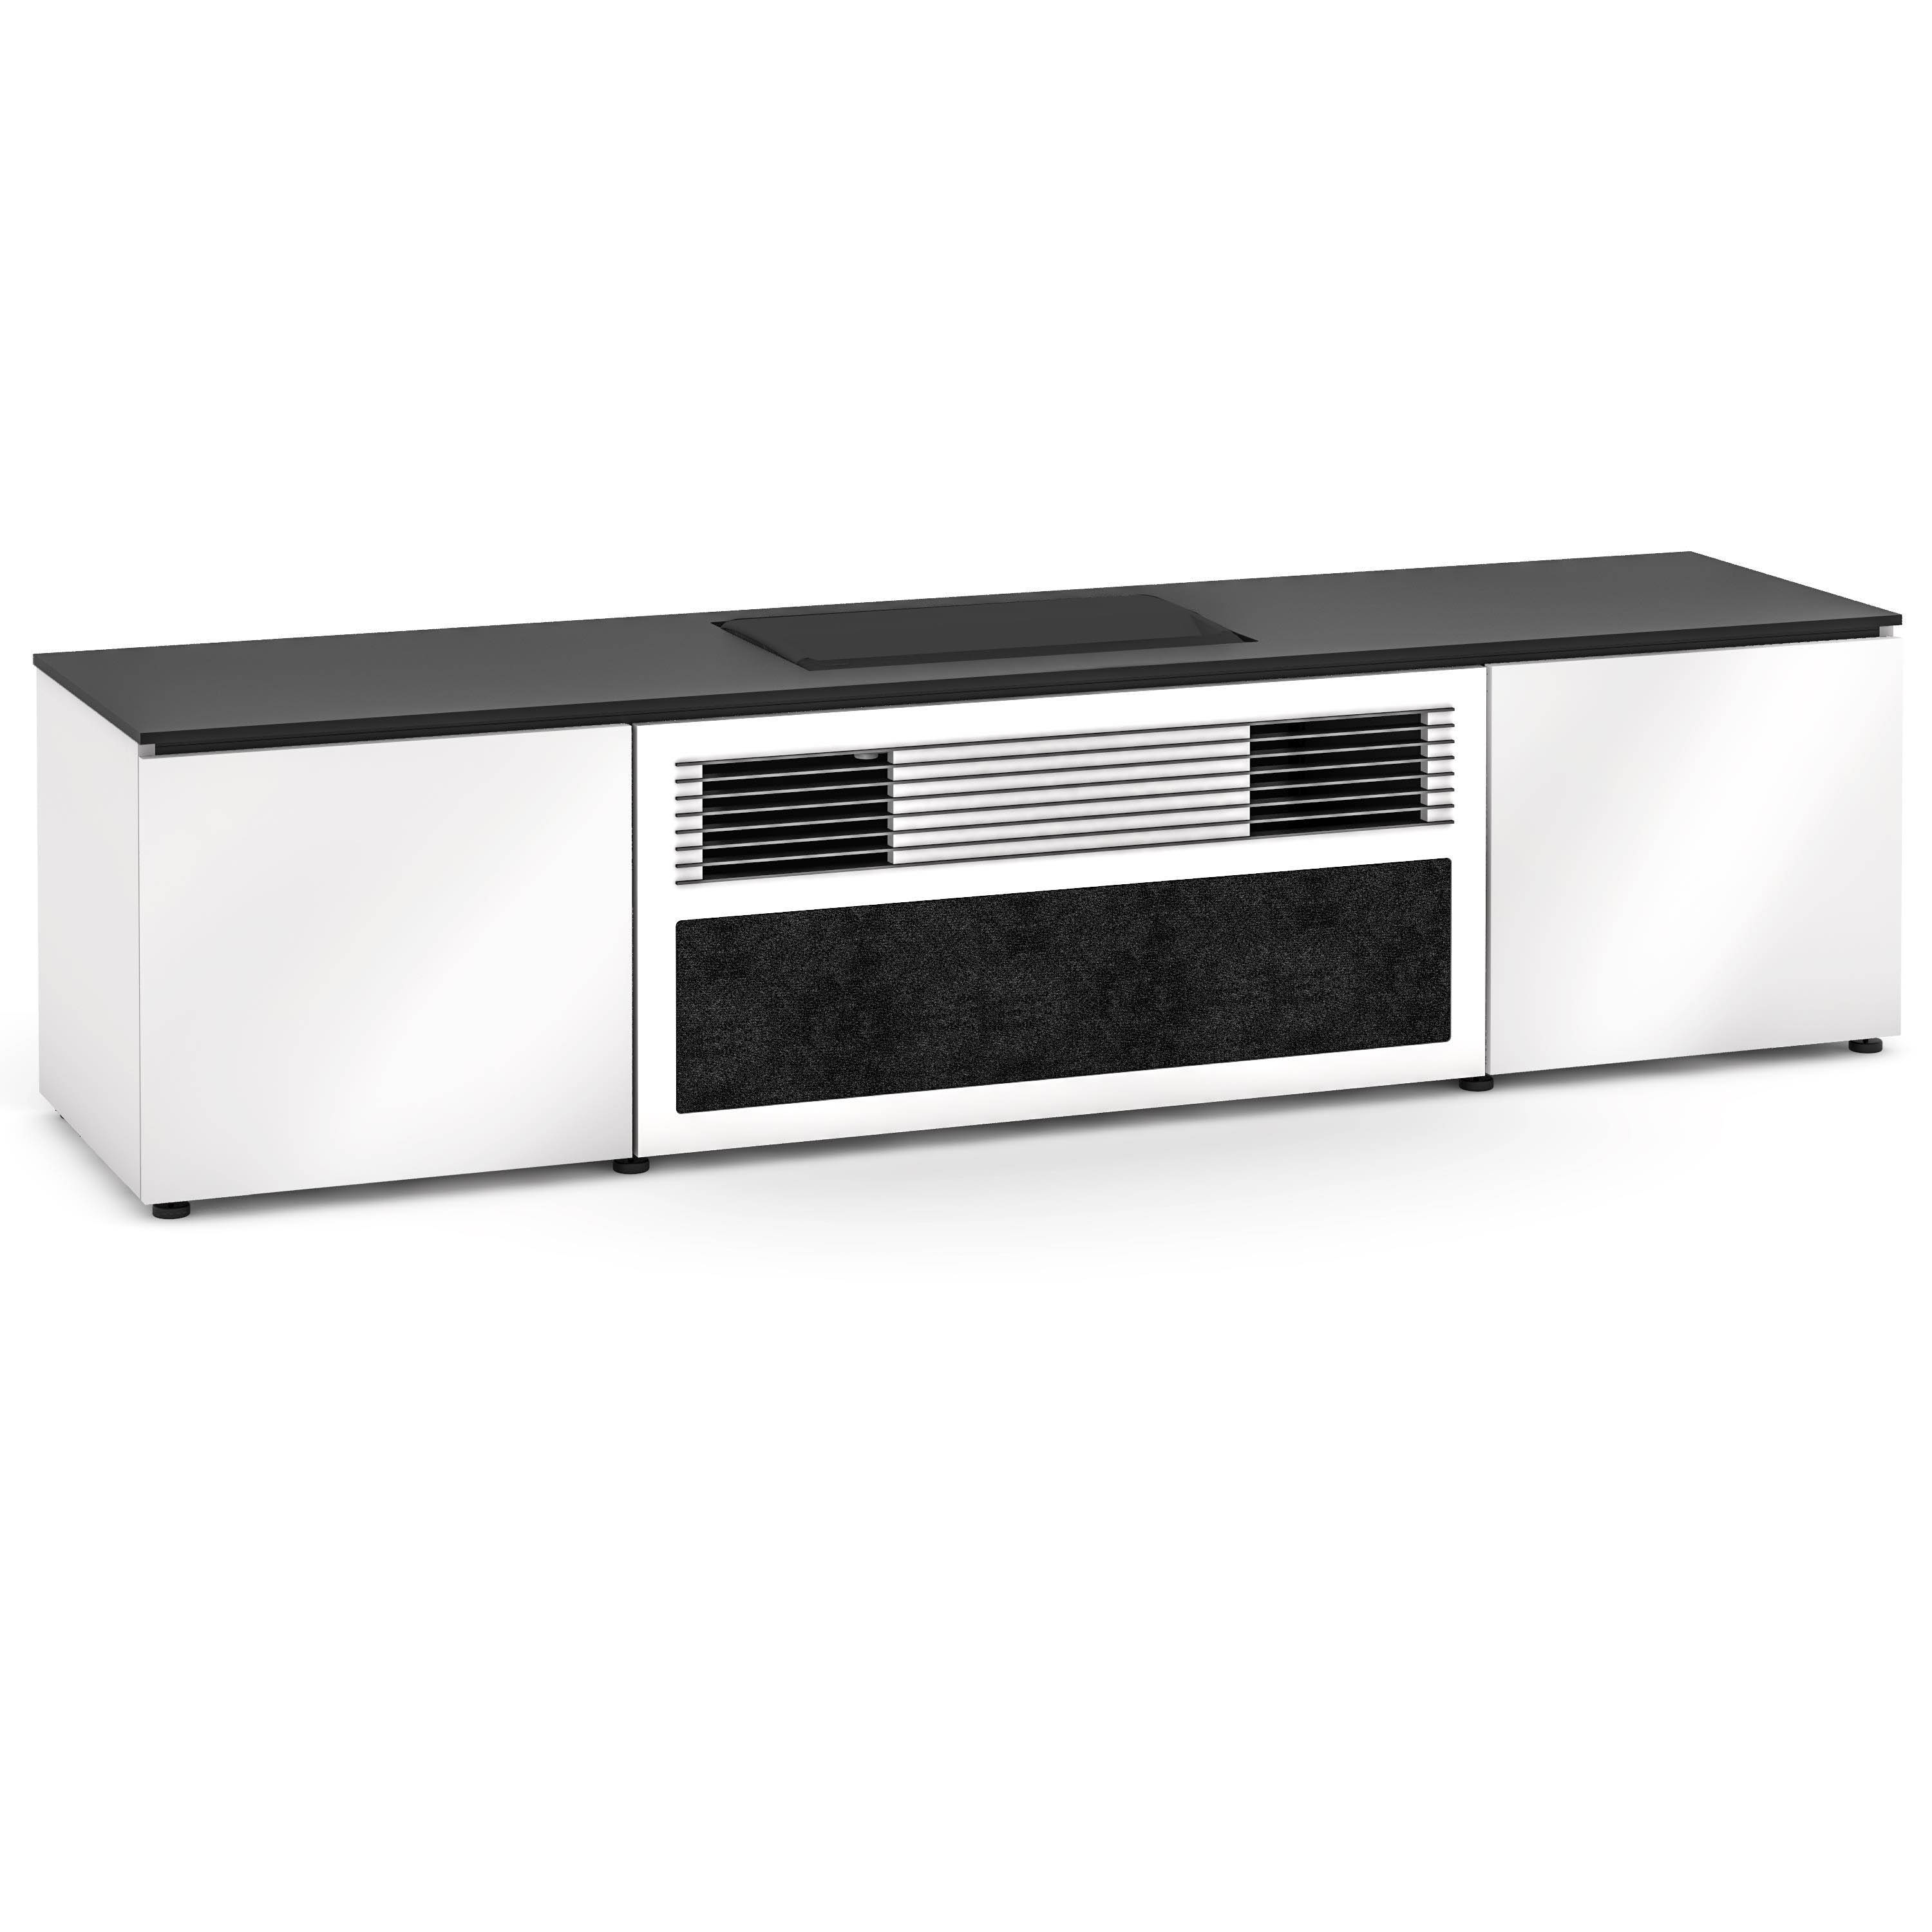 Salamander Designs Miami 245 Cabinet for integrated Hisense 100L9G/120L9G UST Projector - Gloss White - X/HSEL9/245MM/BK